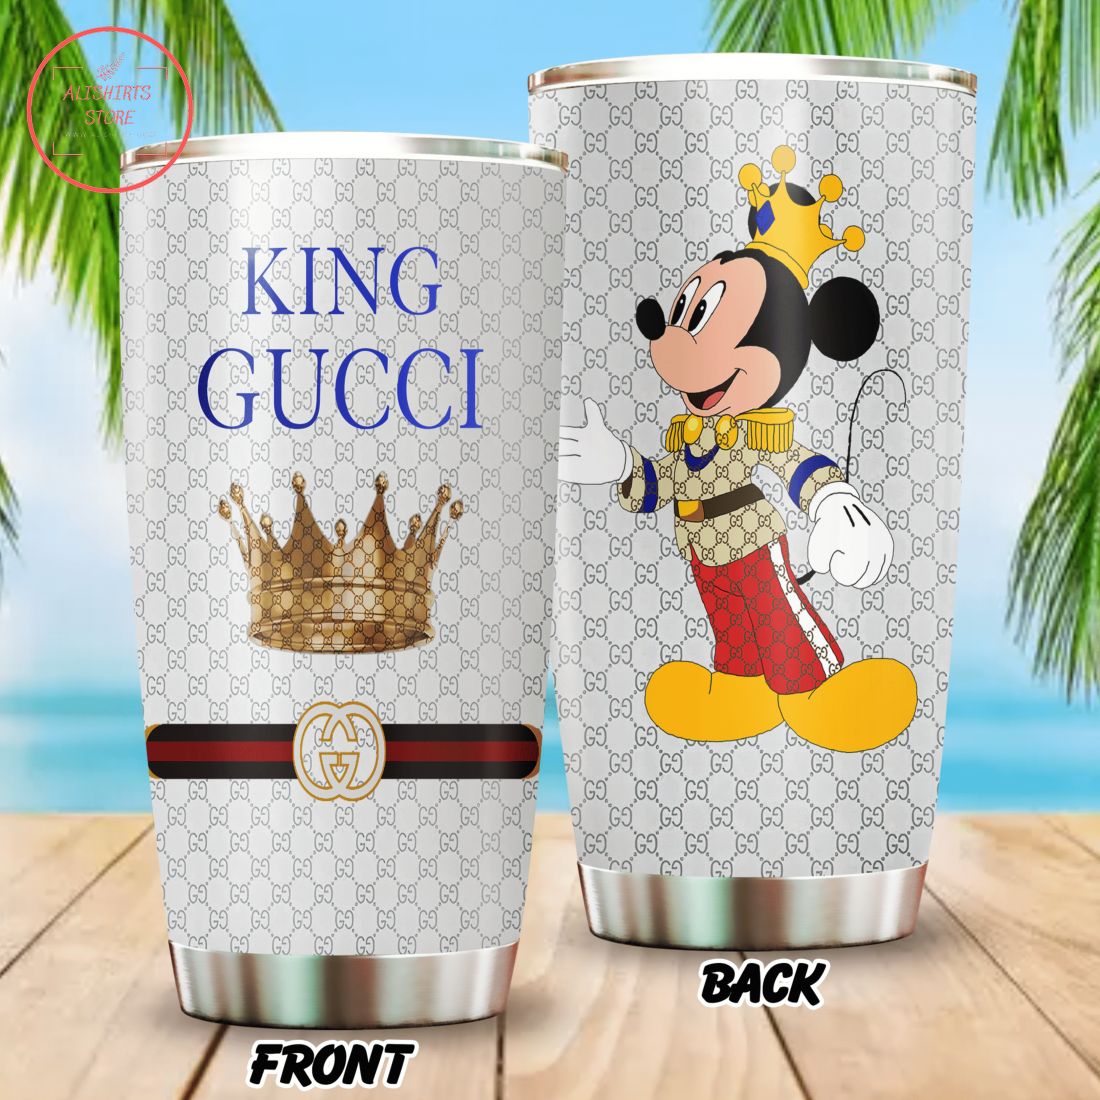 King Gucci Mickey Mouse Disney 3D Tumbler